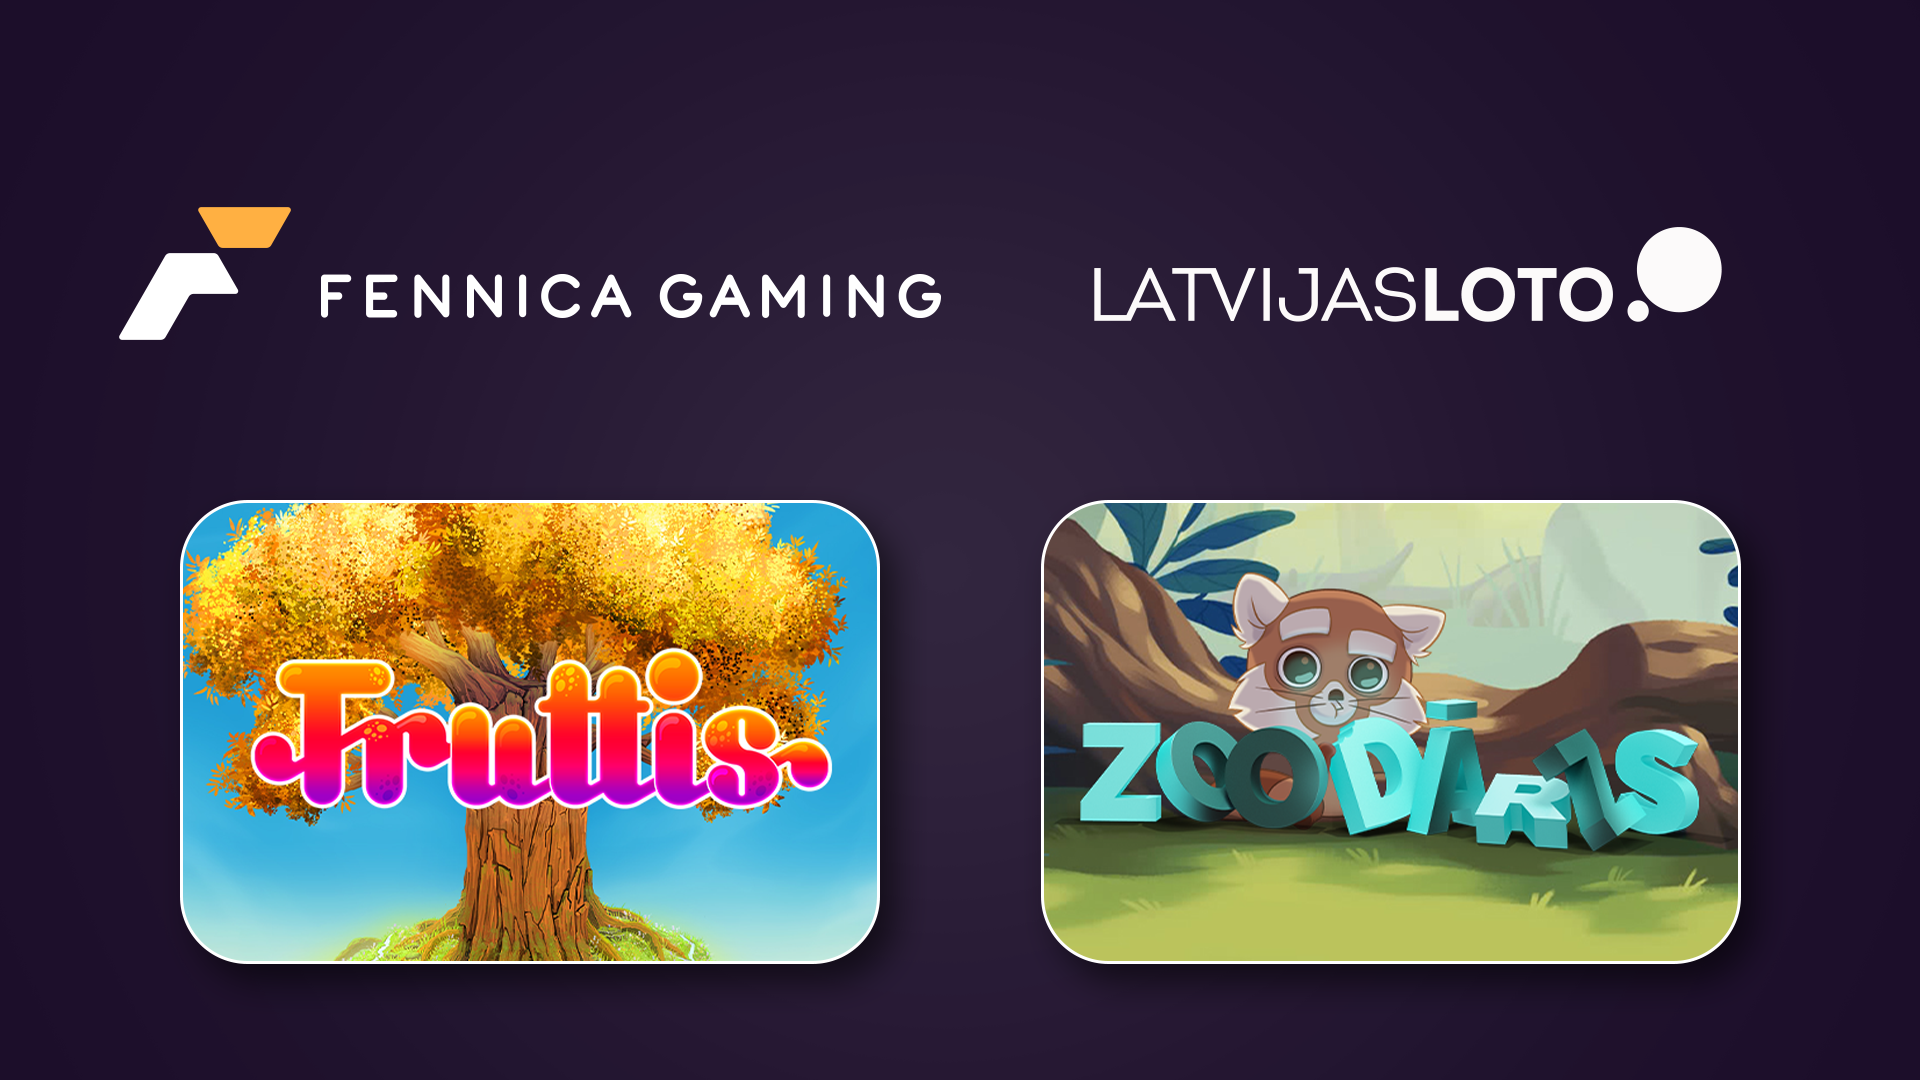 Two games images and Fennica Gaming's and LatvijasLoto's logos